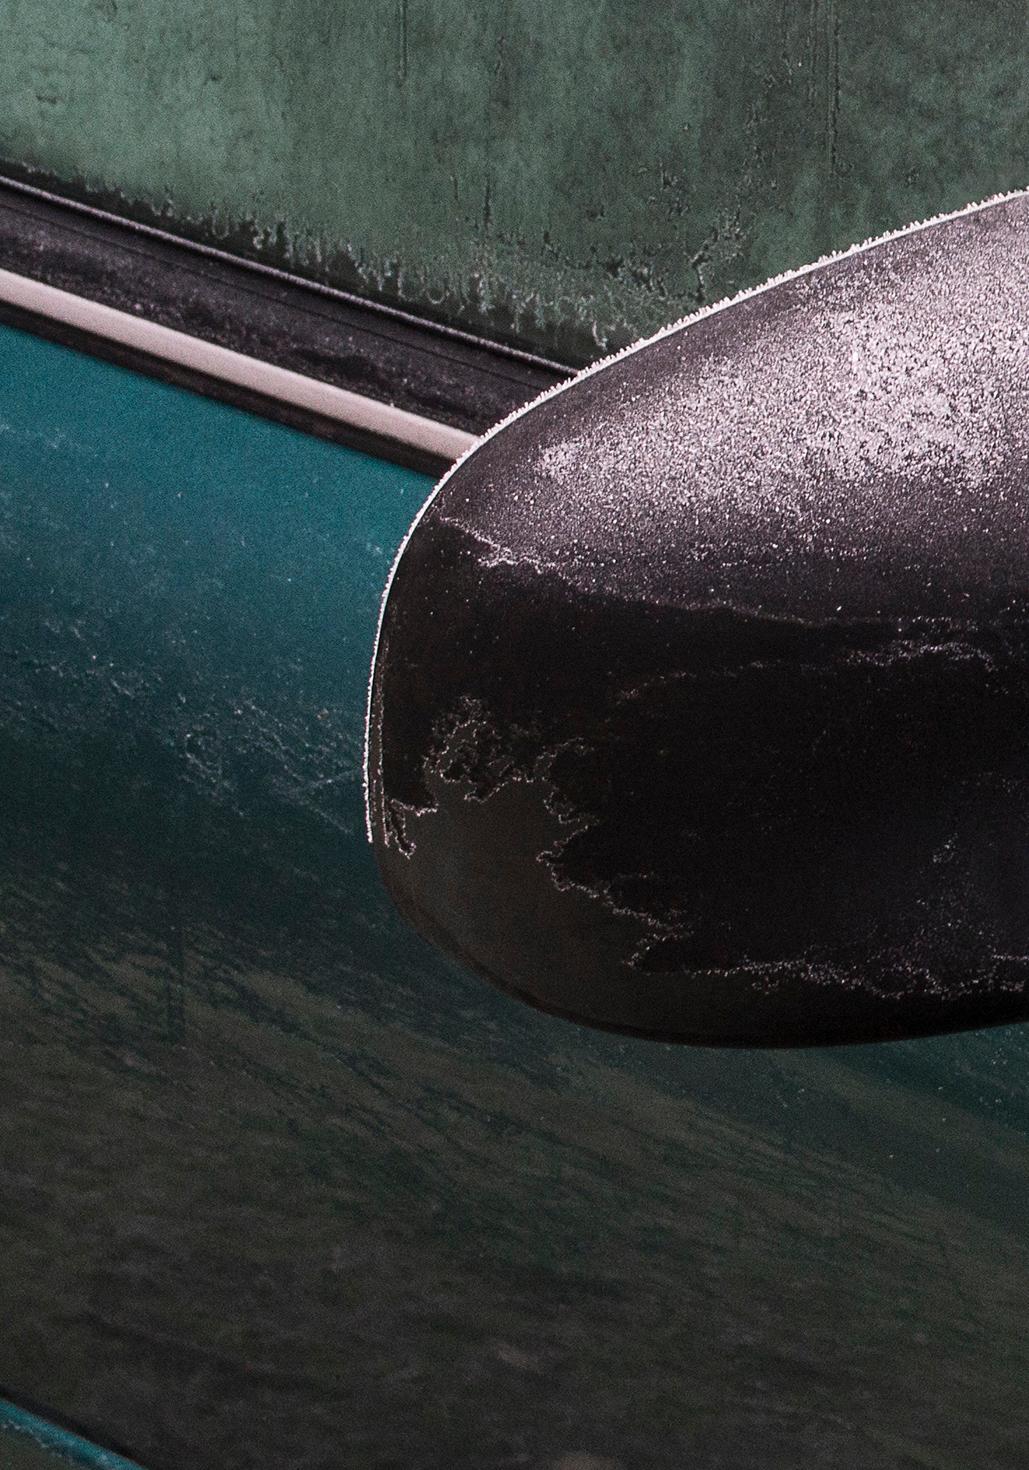 Vancouver New Years - frosty photograph of green car mirror in winter (30 x 45) - Contemporary Print by Alison Postma